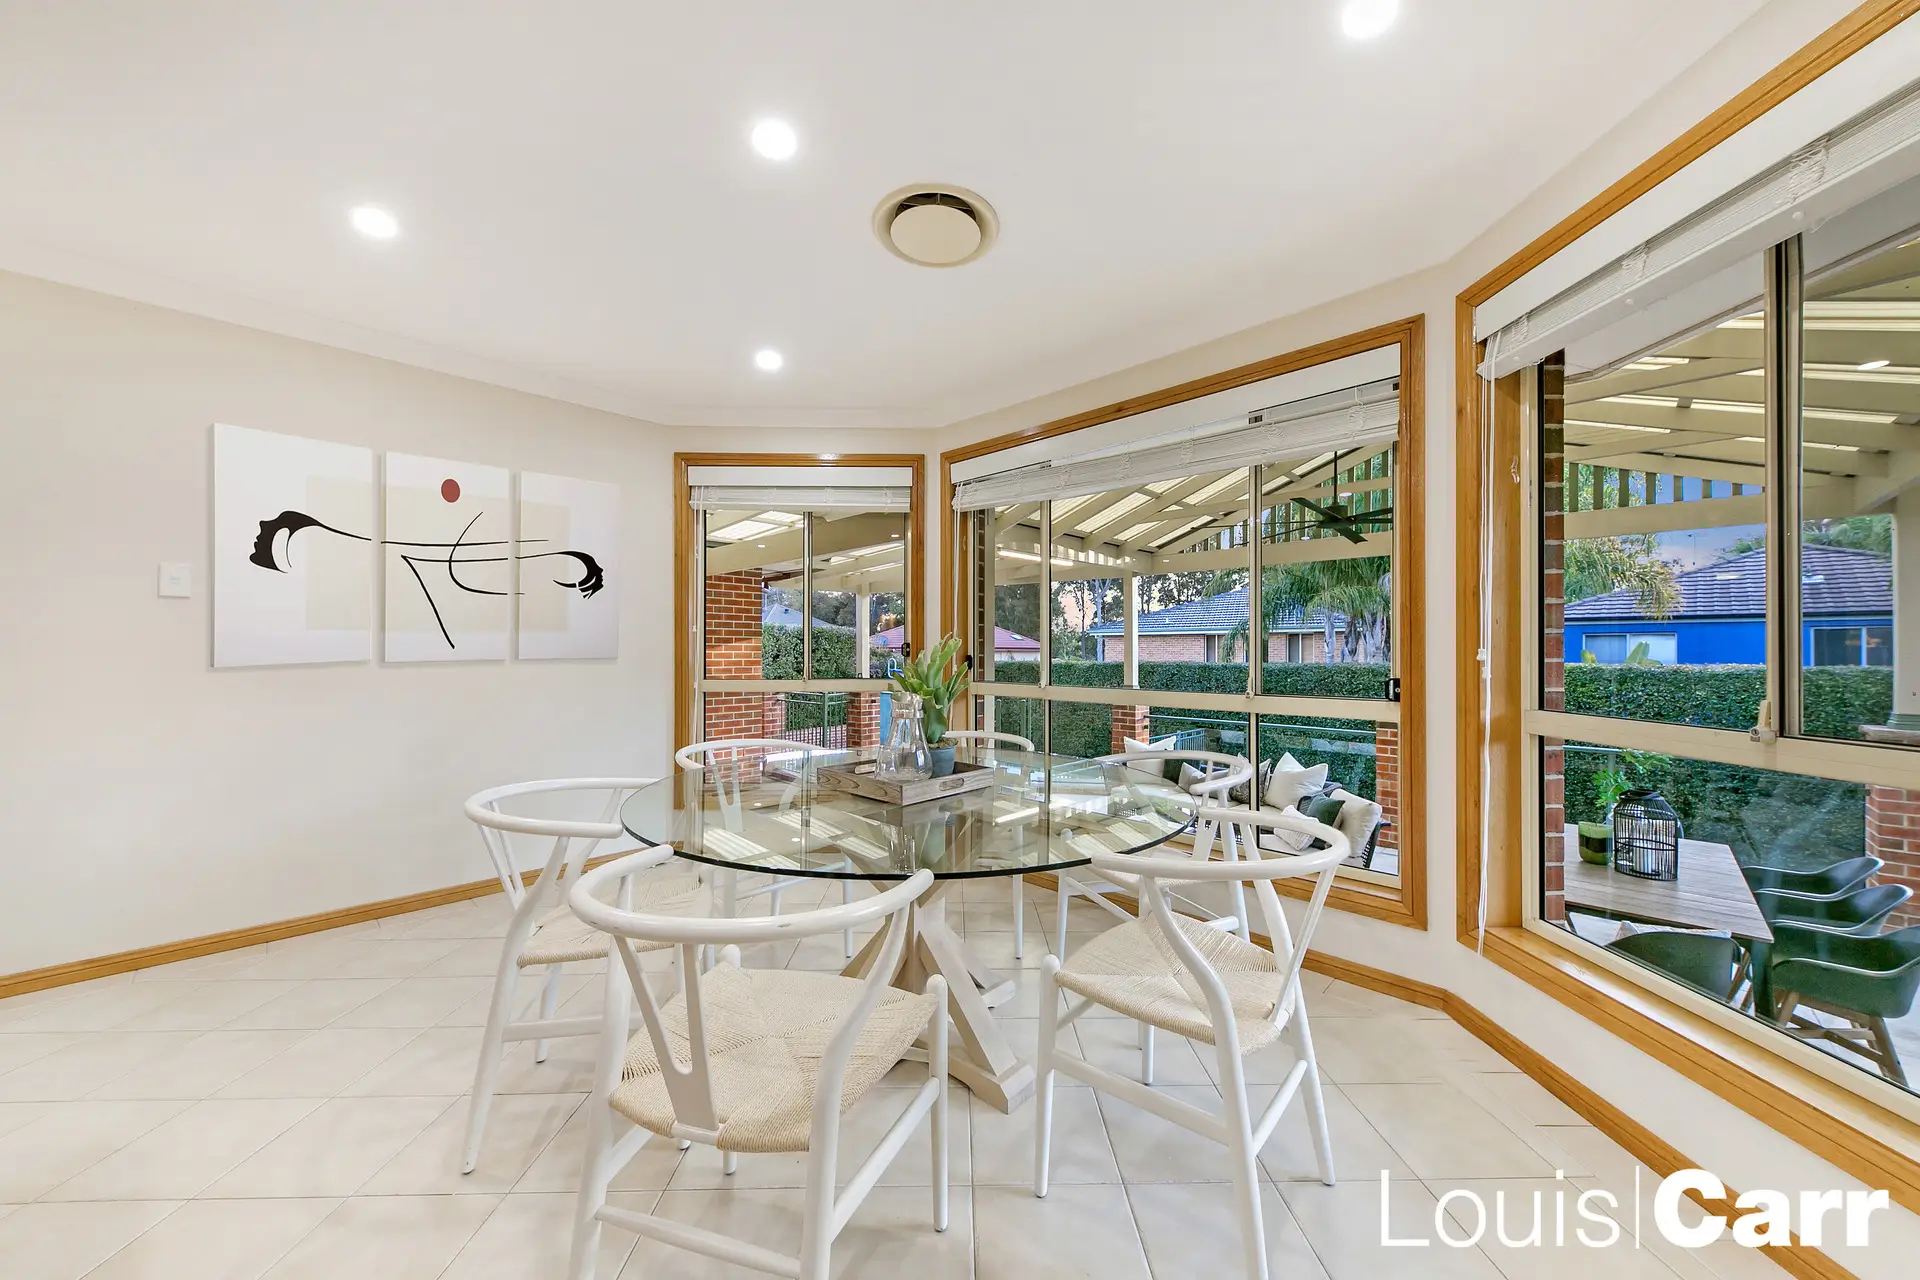 Photo #9: 44 Perisher Road, Beaumont Hills - Sold by Louis Carr Real Estate